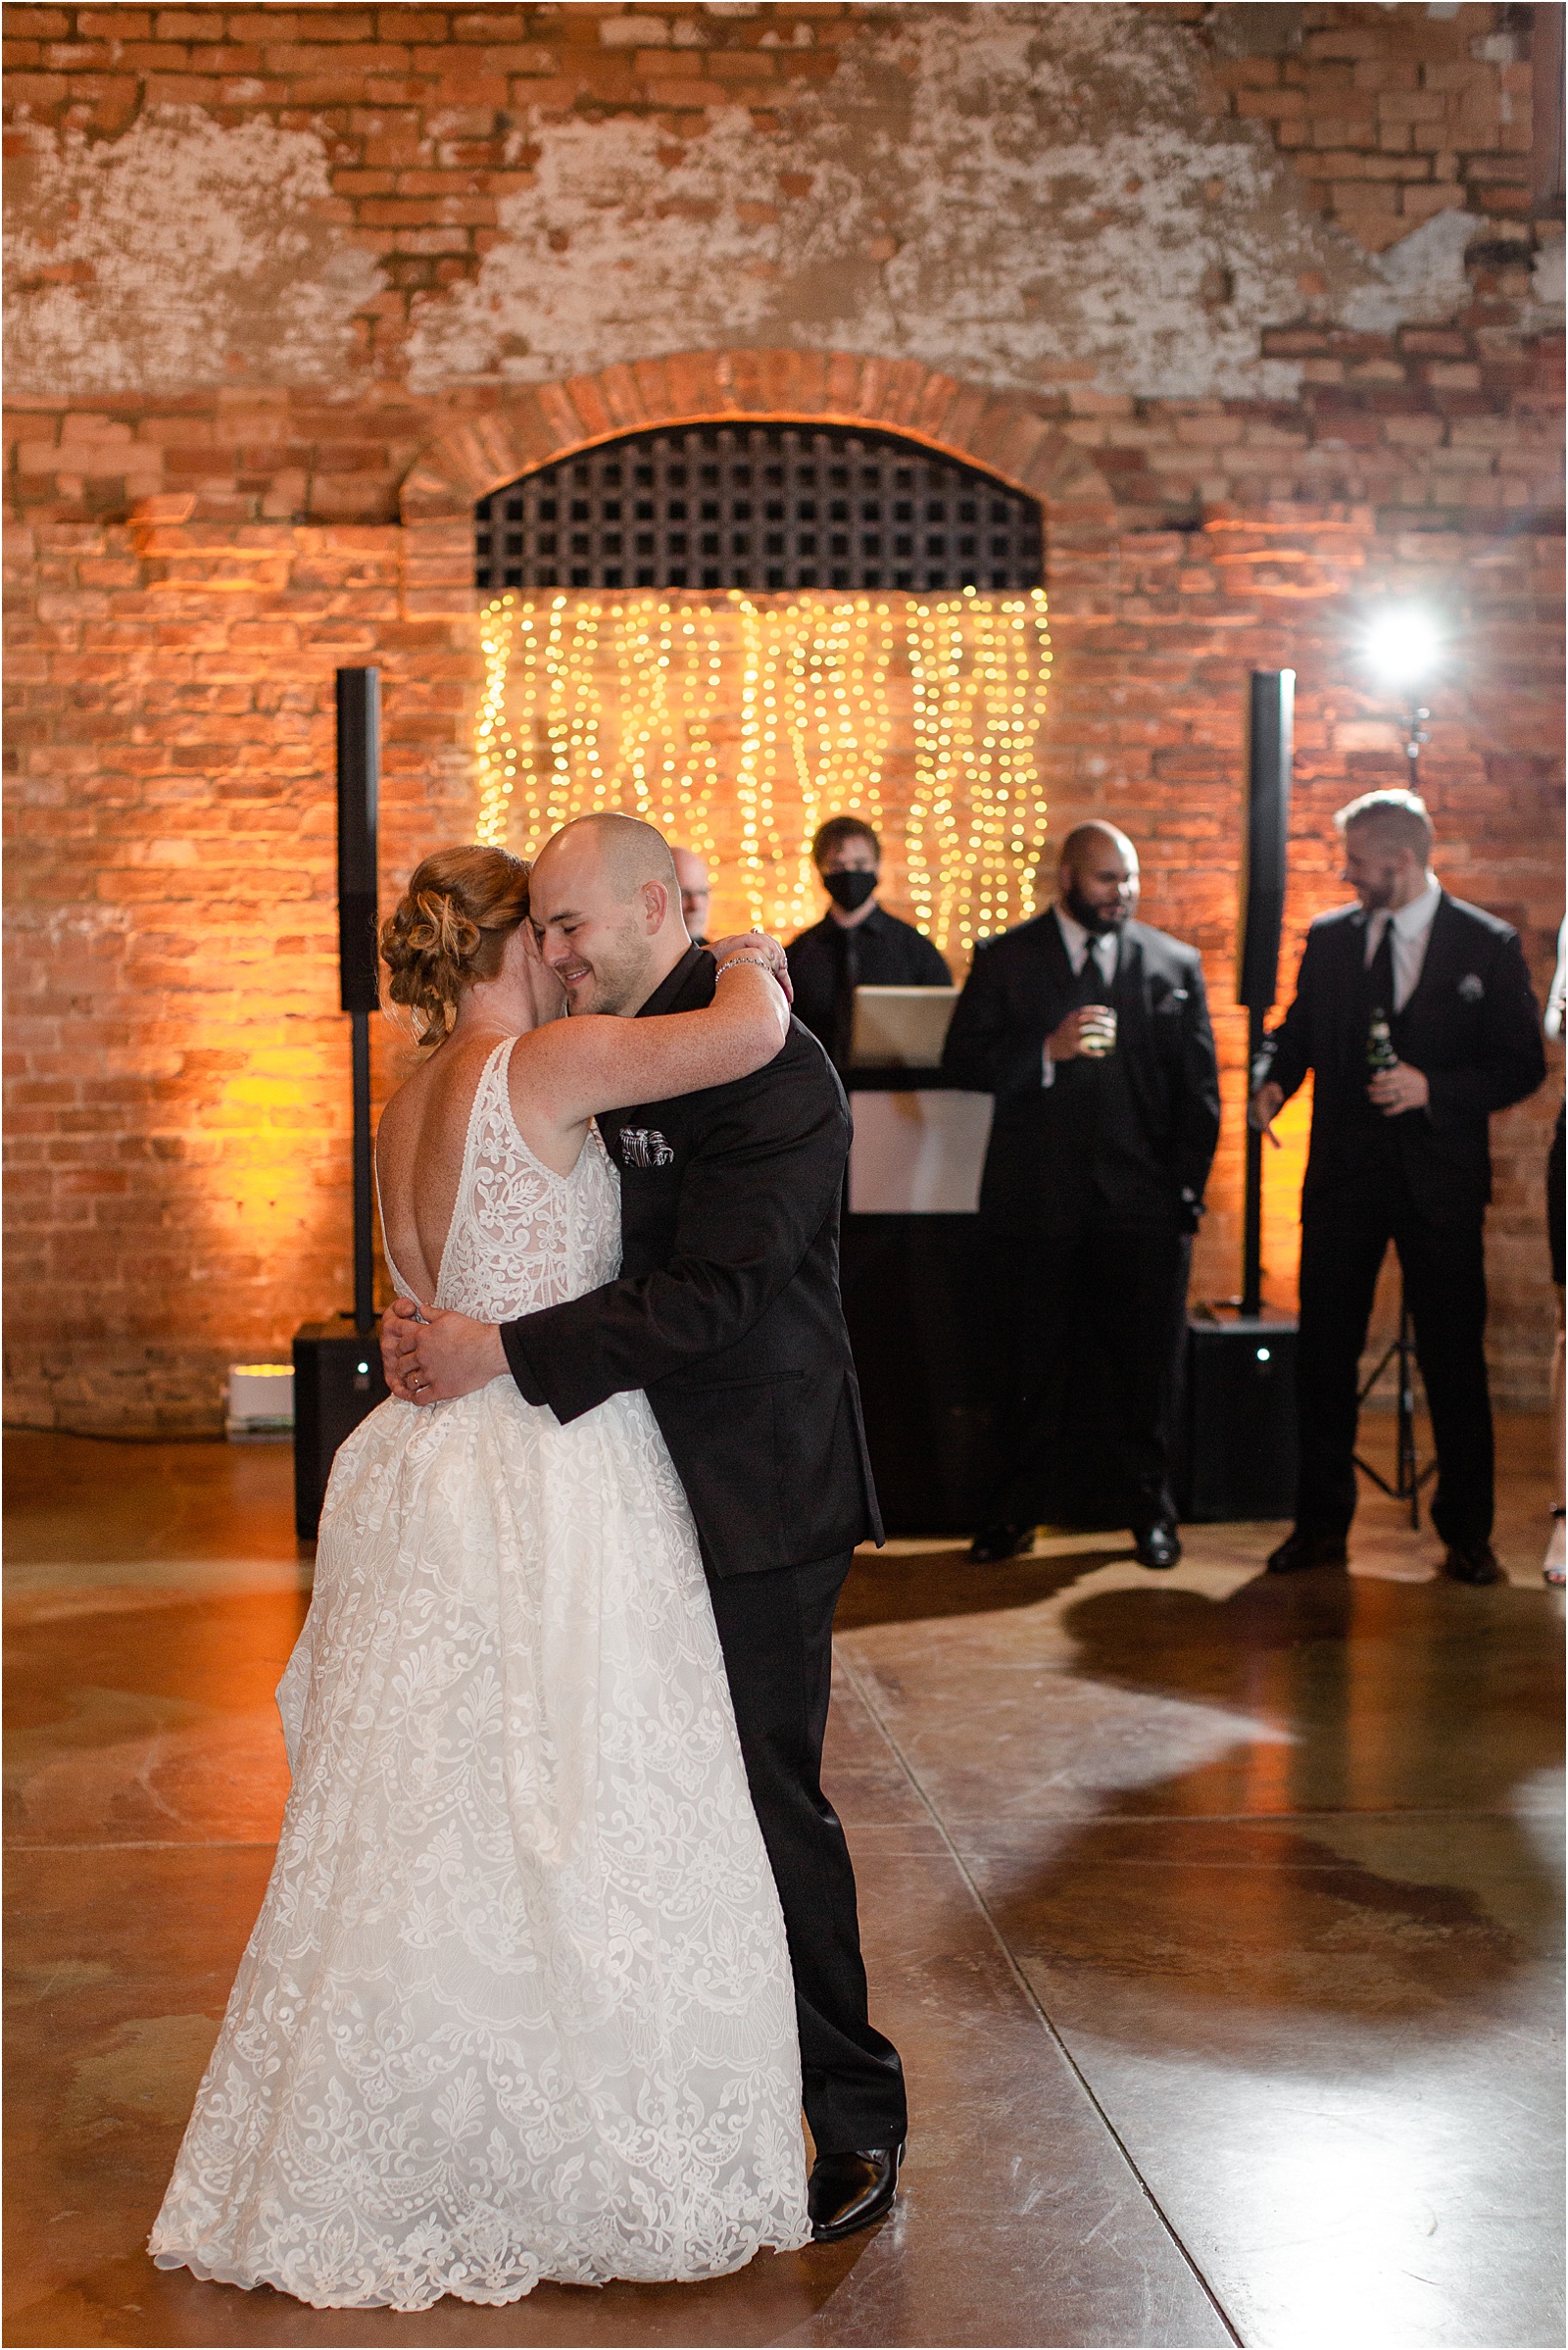 Just married couple sharing first dance at Old Cigar Warehouse